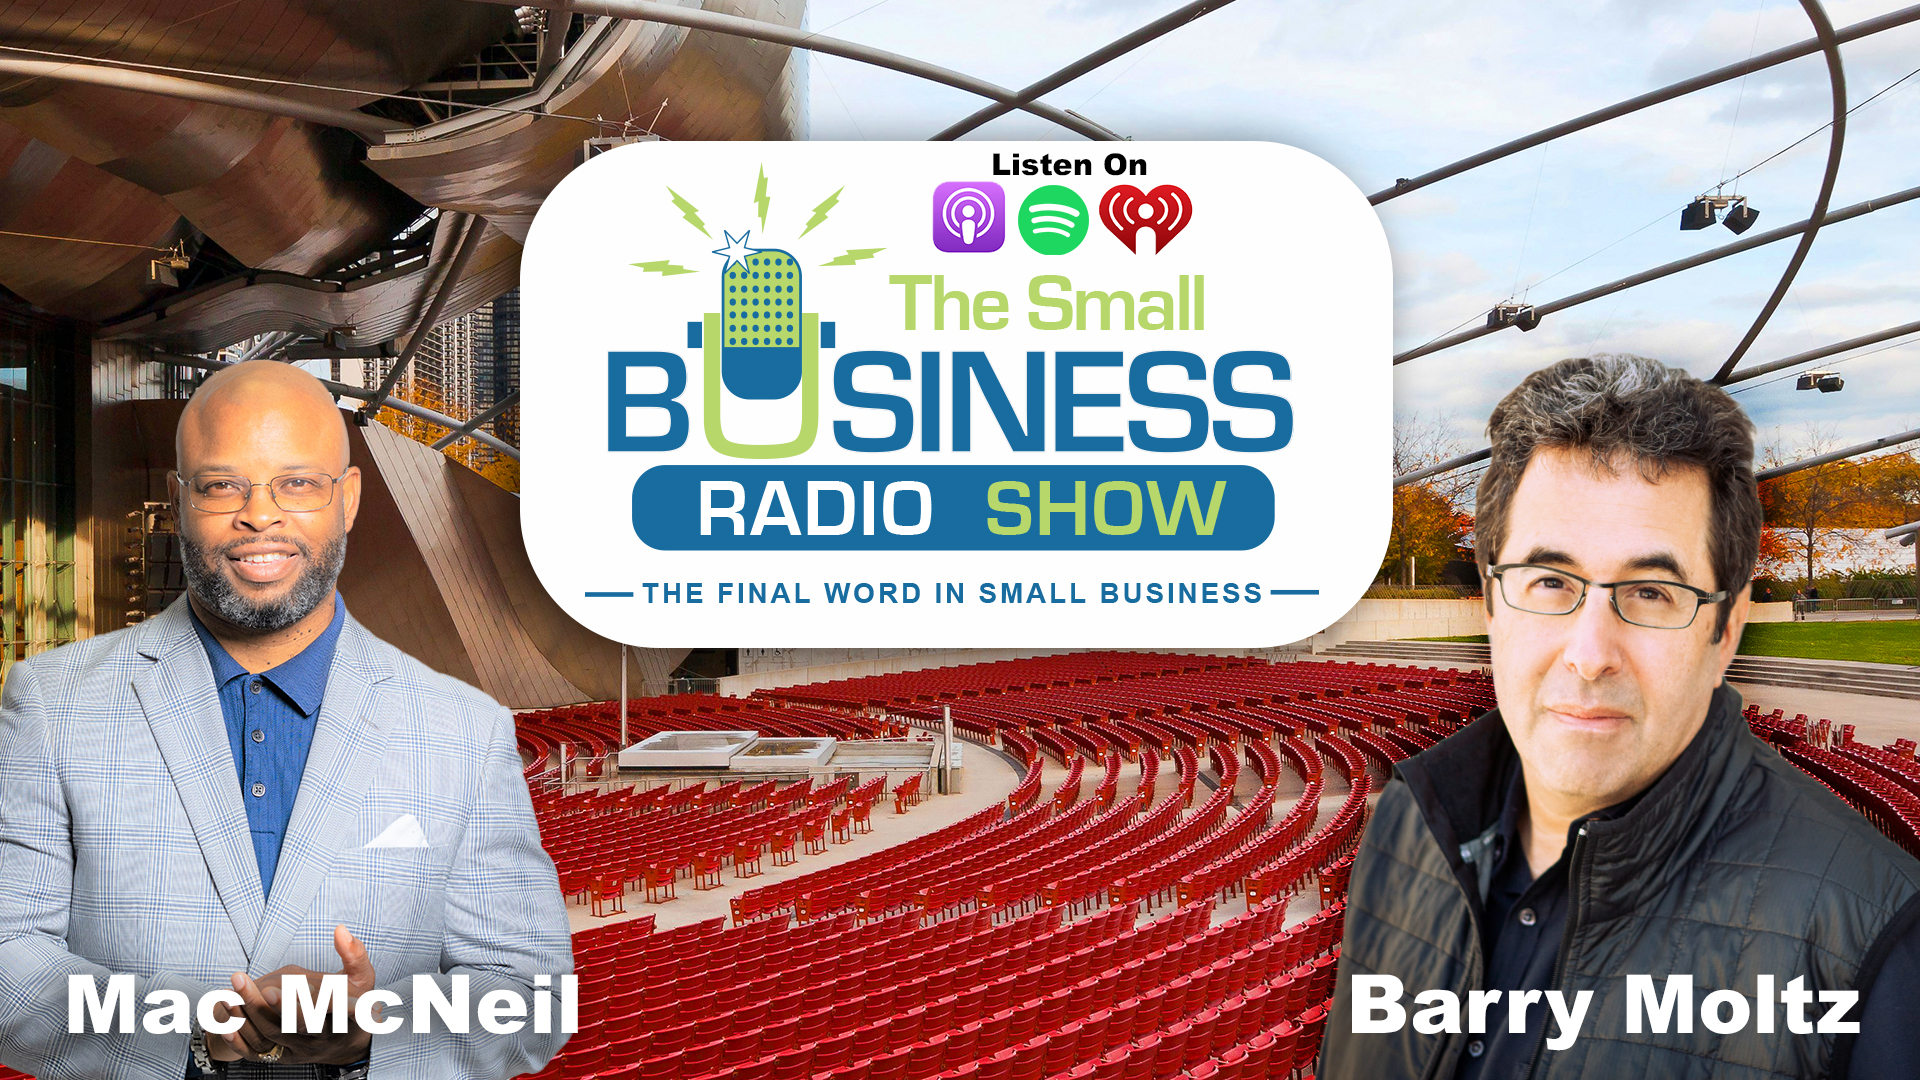 Mac McNeil on The Small Business Radio Show